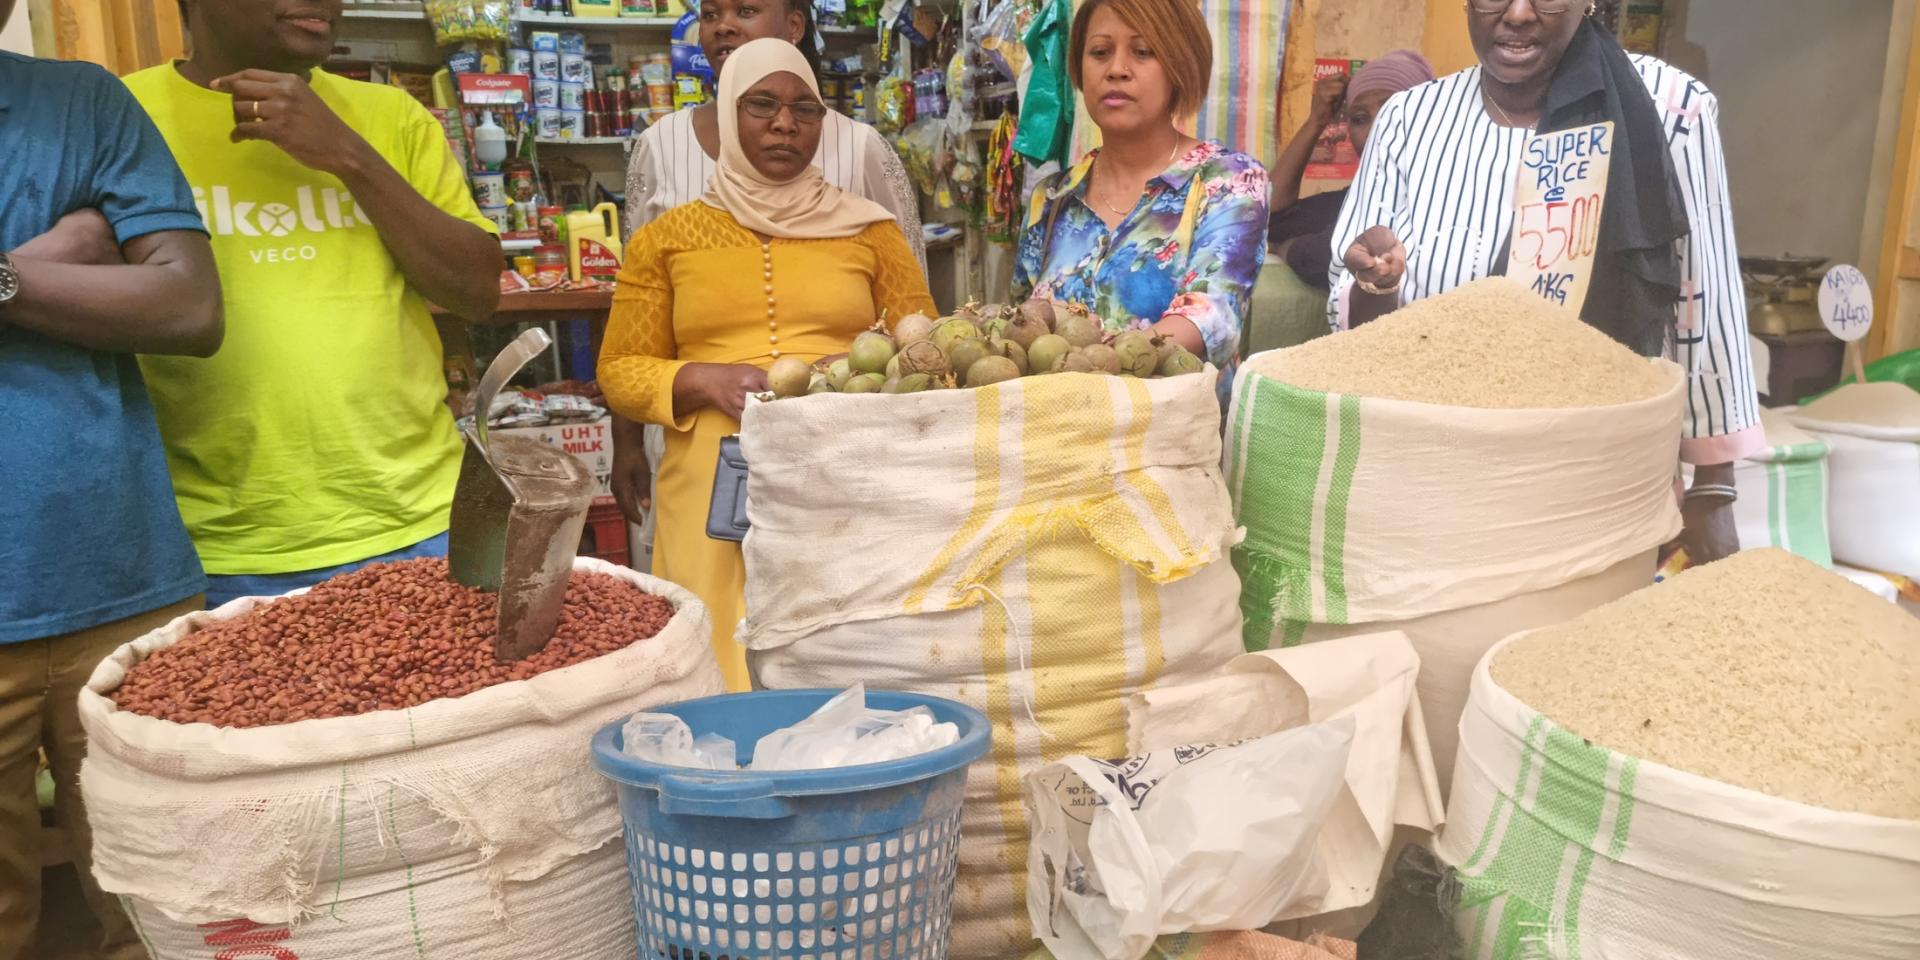 Fauzia Birabwa (in yellow dress) in the market where she retails rice and other commodities